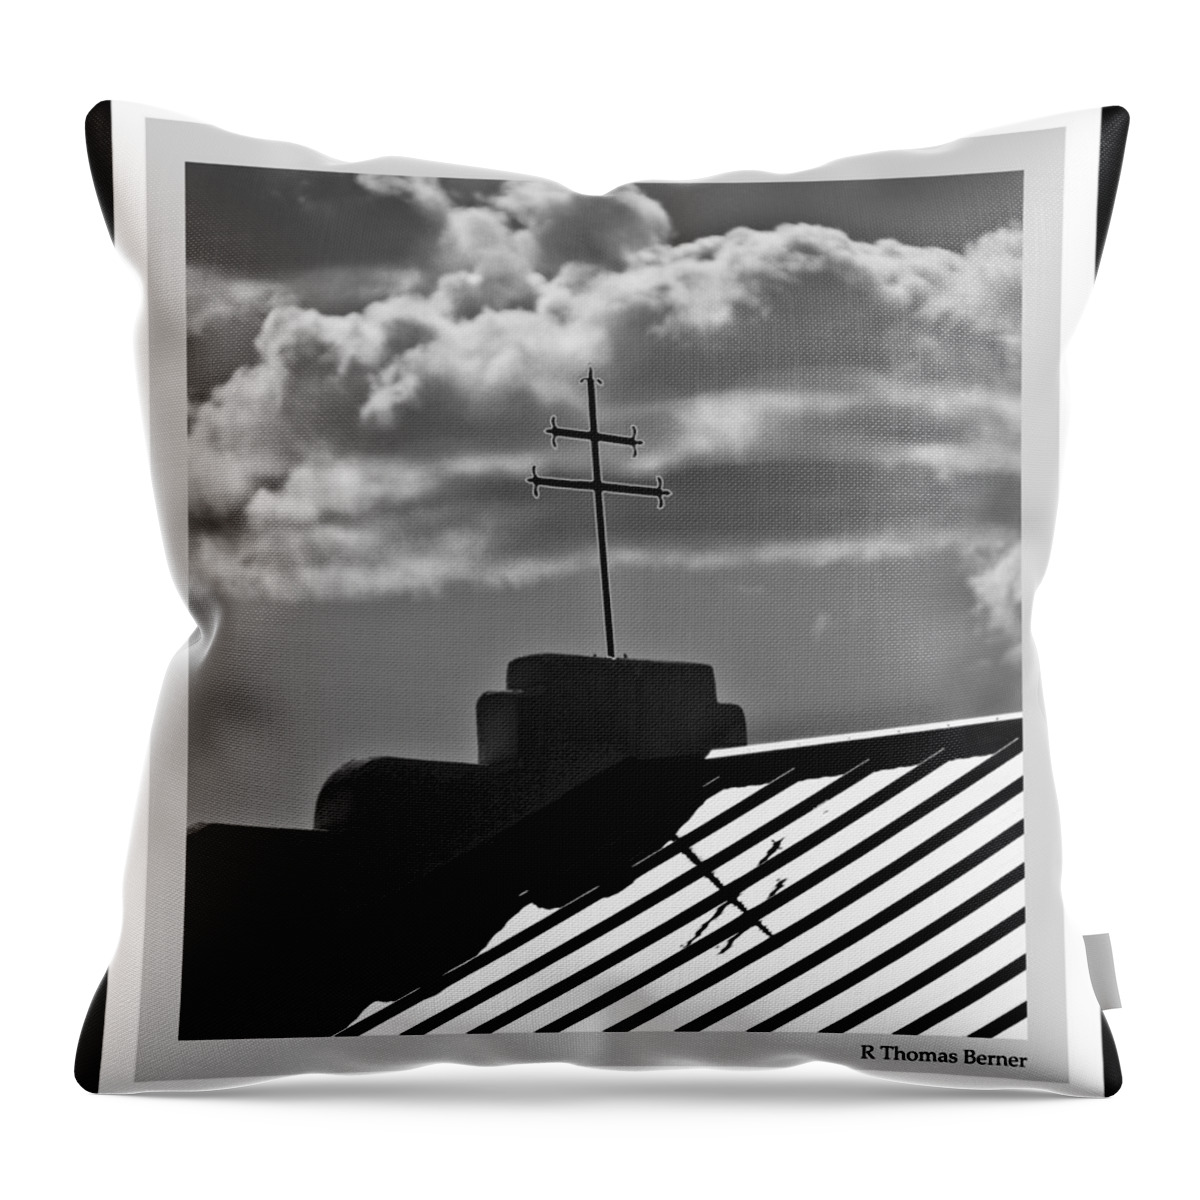 Patagonia Throw Pillow featuring the photograph Patagonia Cross by R Thomas Berner